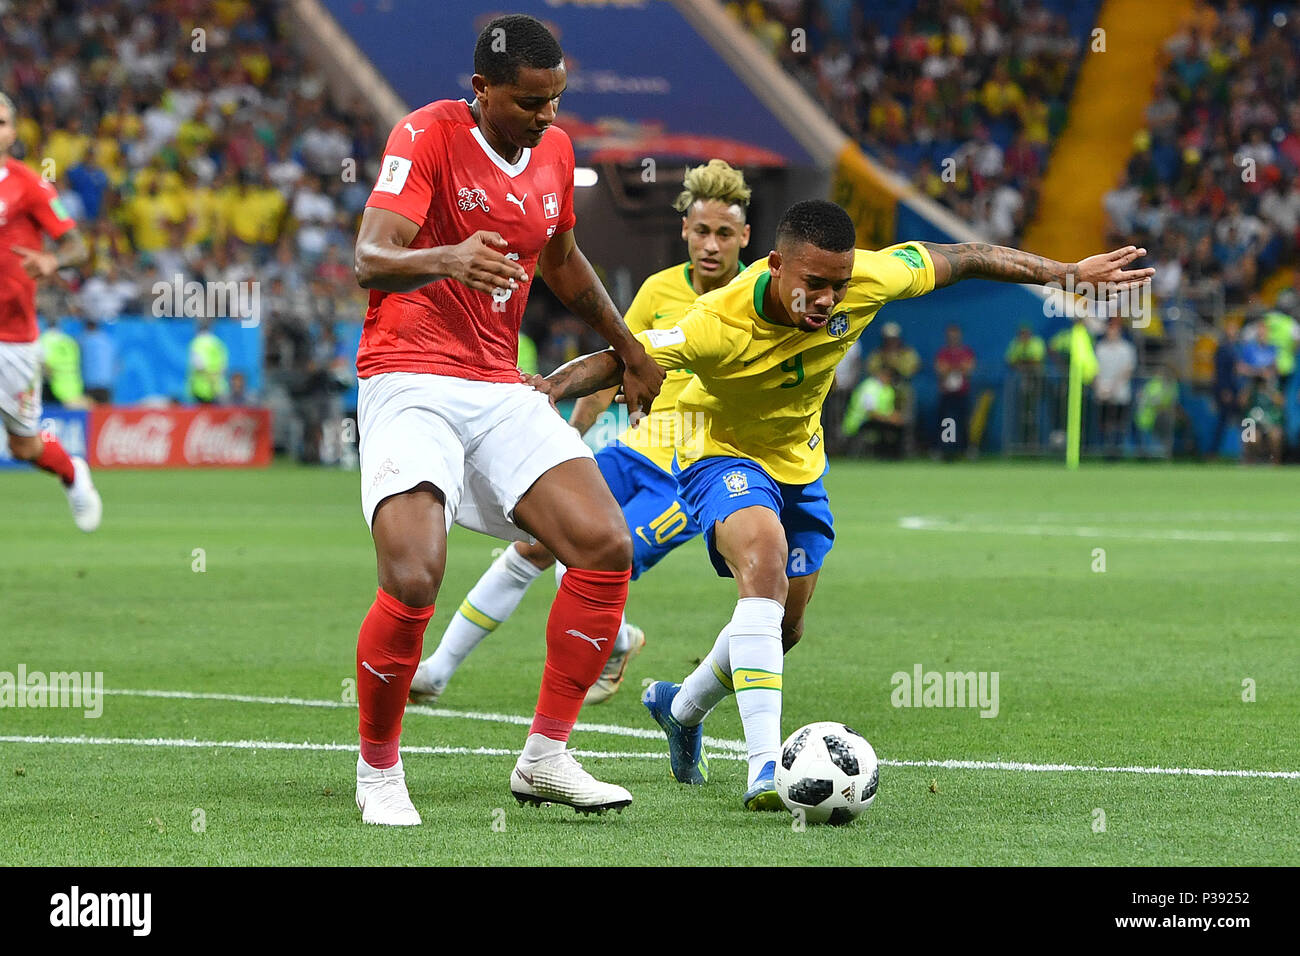 Rostov On Don, Russland. 17th June, 2018. GABRIEL JESUS (BRA), action, duels versus Manuel AKANJI (SUI). Brazil (BRA) -Switzerland (SUI) 1-1, Preliminary Round, Group E, match 09, on 17.06.2018 in Rostov-on-Don, Rostov Arena. Football World Cup 2018 in Russia from 14.06. - 15.07.2018. | usage worldwide Credit: dpa/Alamy Live News Stock Photo